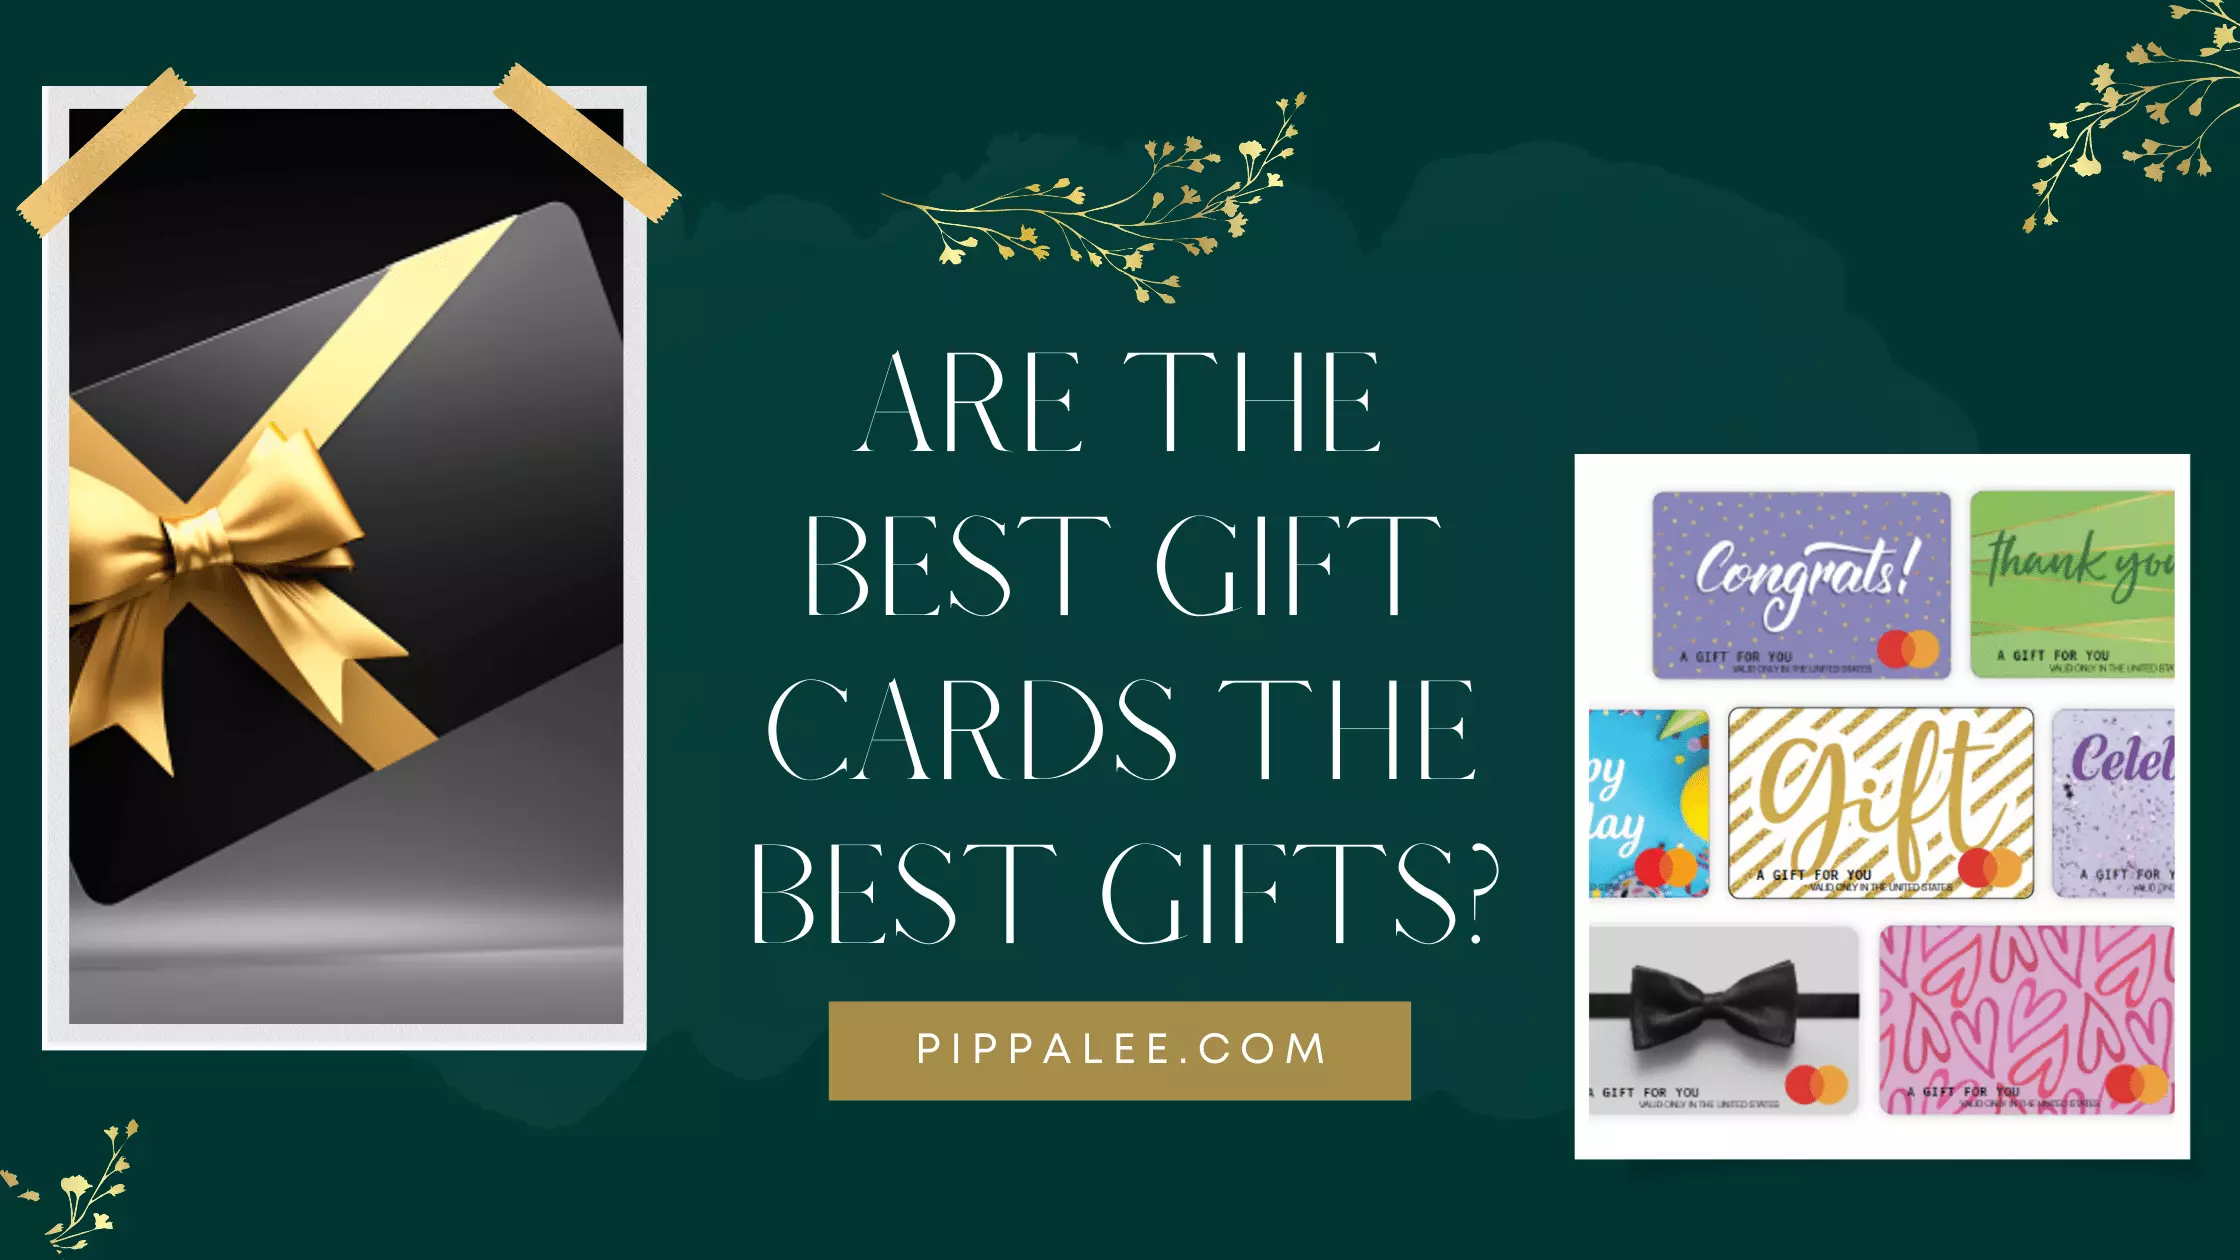 Are The Best Gift Cards the Best Gifts?